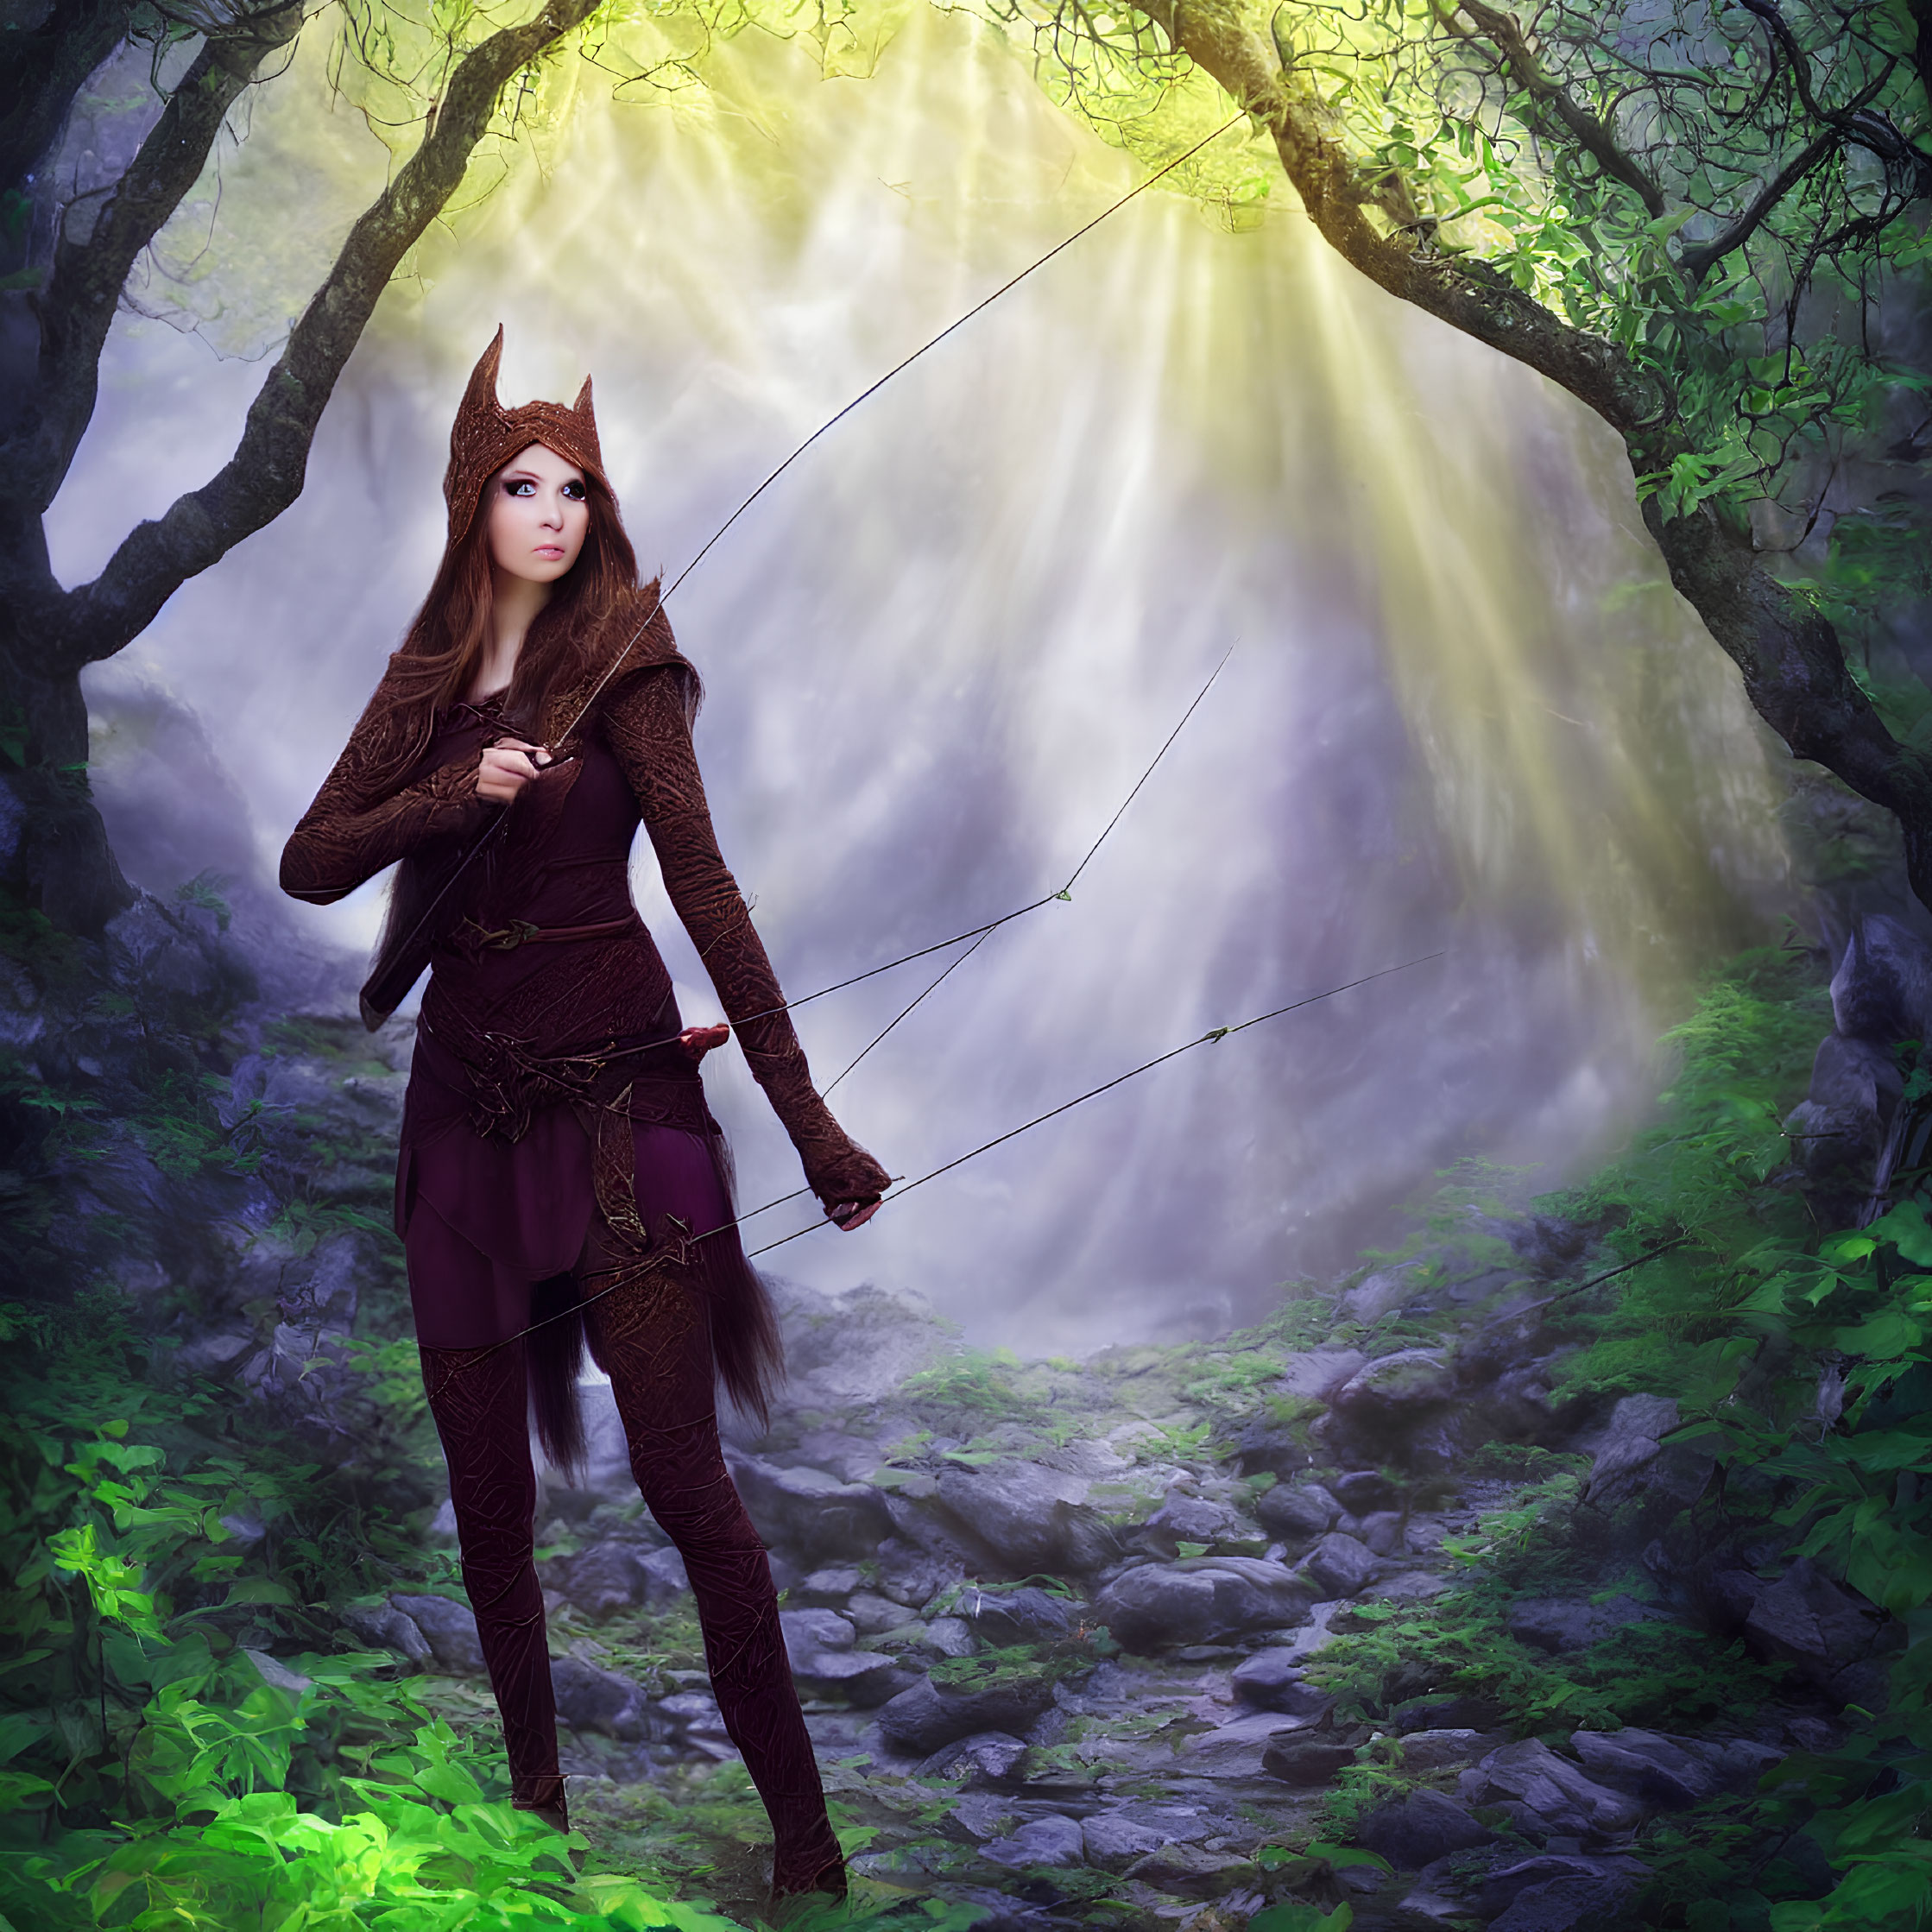 Archer costume in fantasy woodland with waterfall